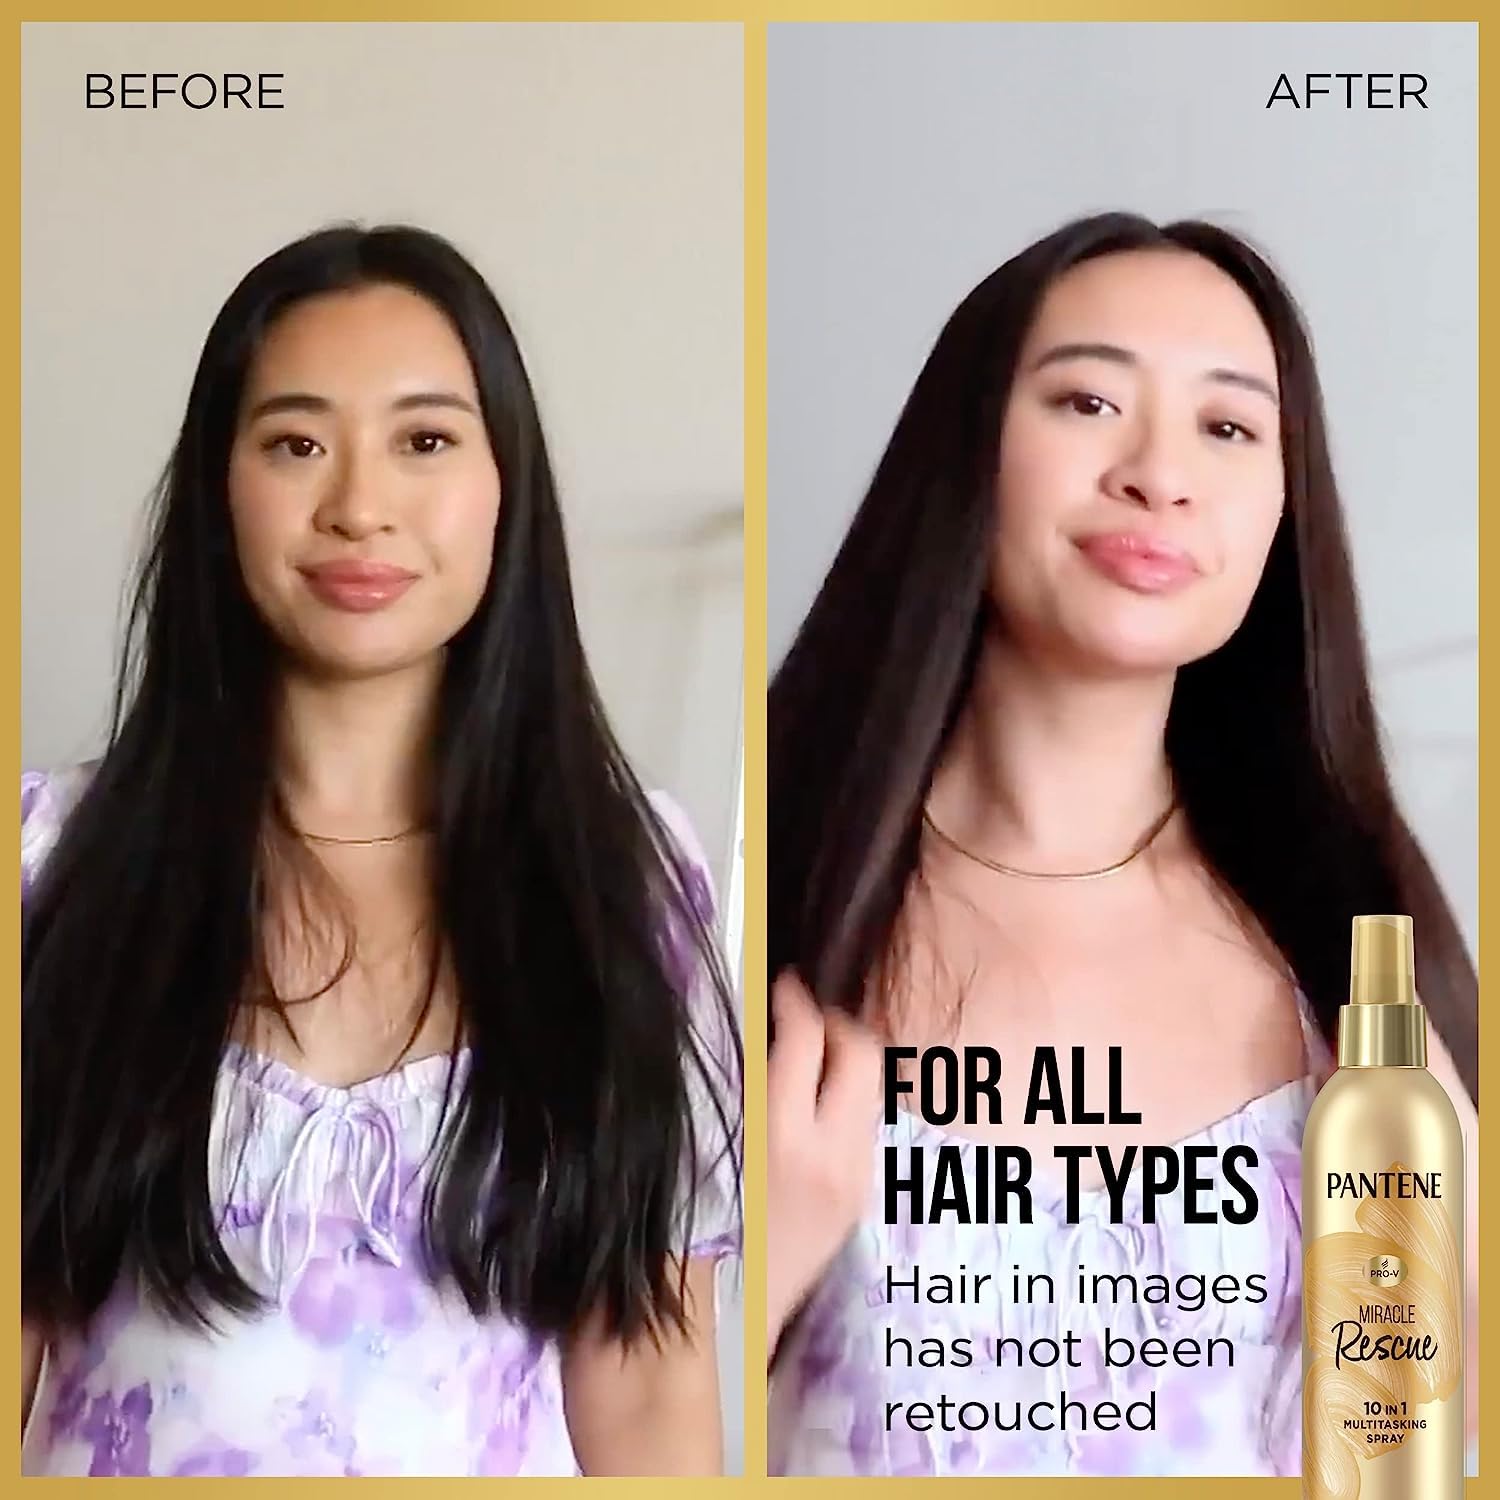 Pantene Hair Spray Miracle Rescue Leave In Conditioner Spray & Mix-In Treatment, Boost of Hydration for Damaged Hair, 5.7 Fl Oz and 3 Fl Oz Each